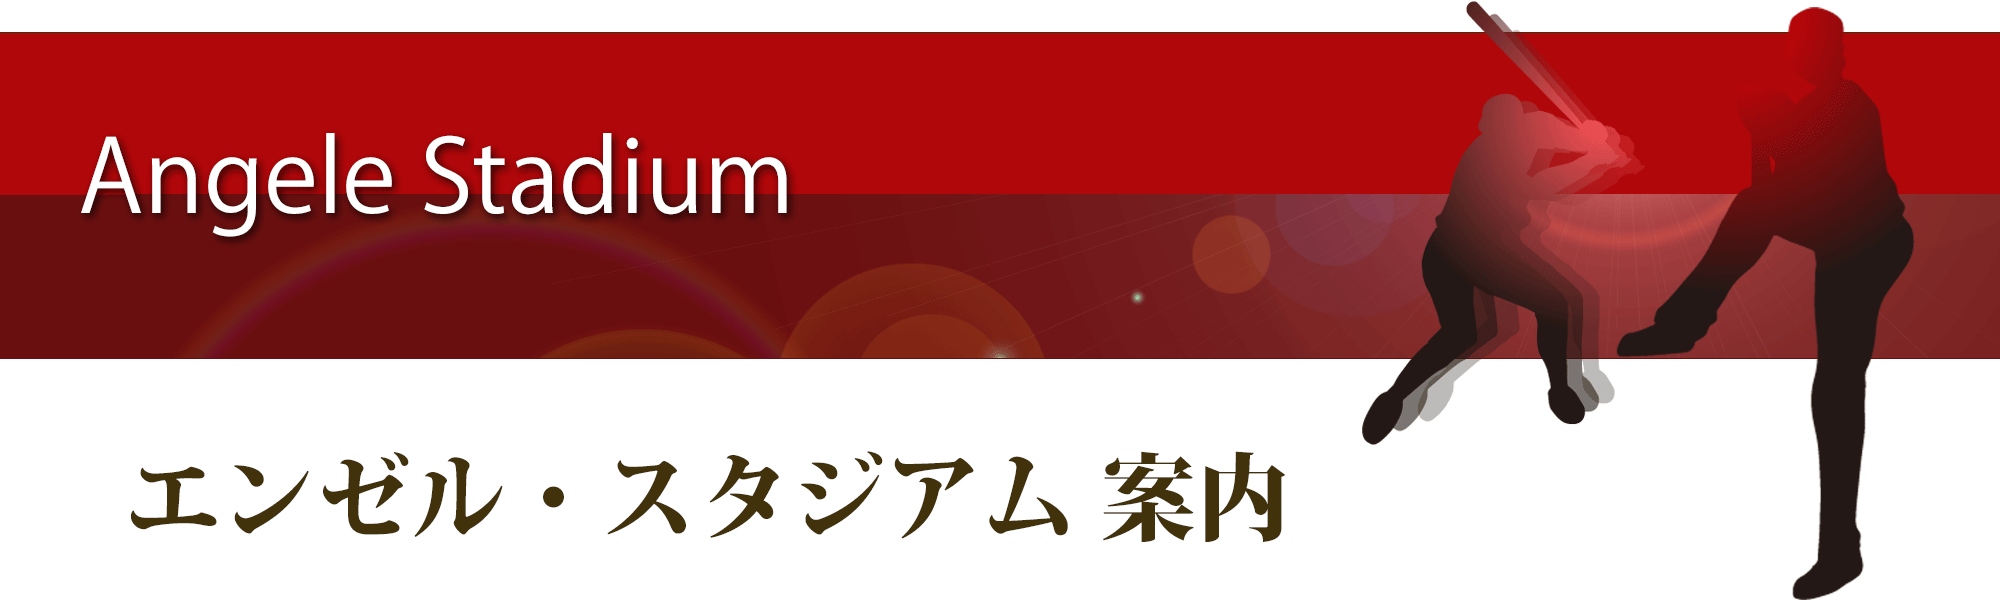 PC用の画像